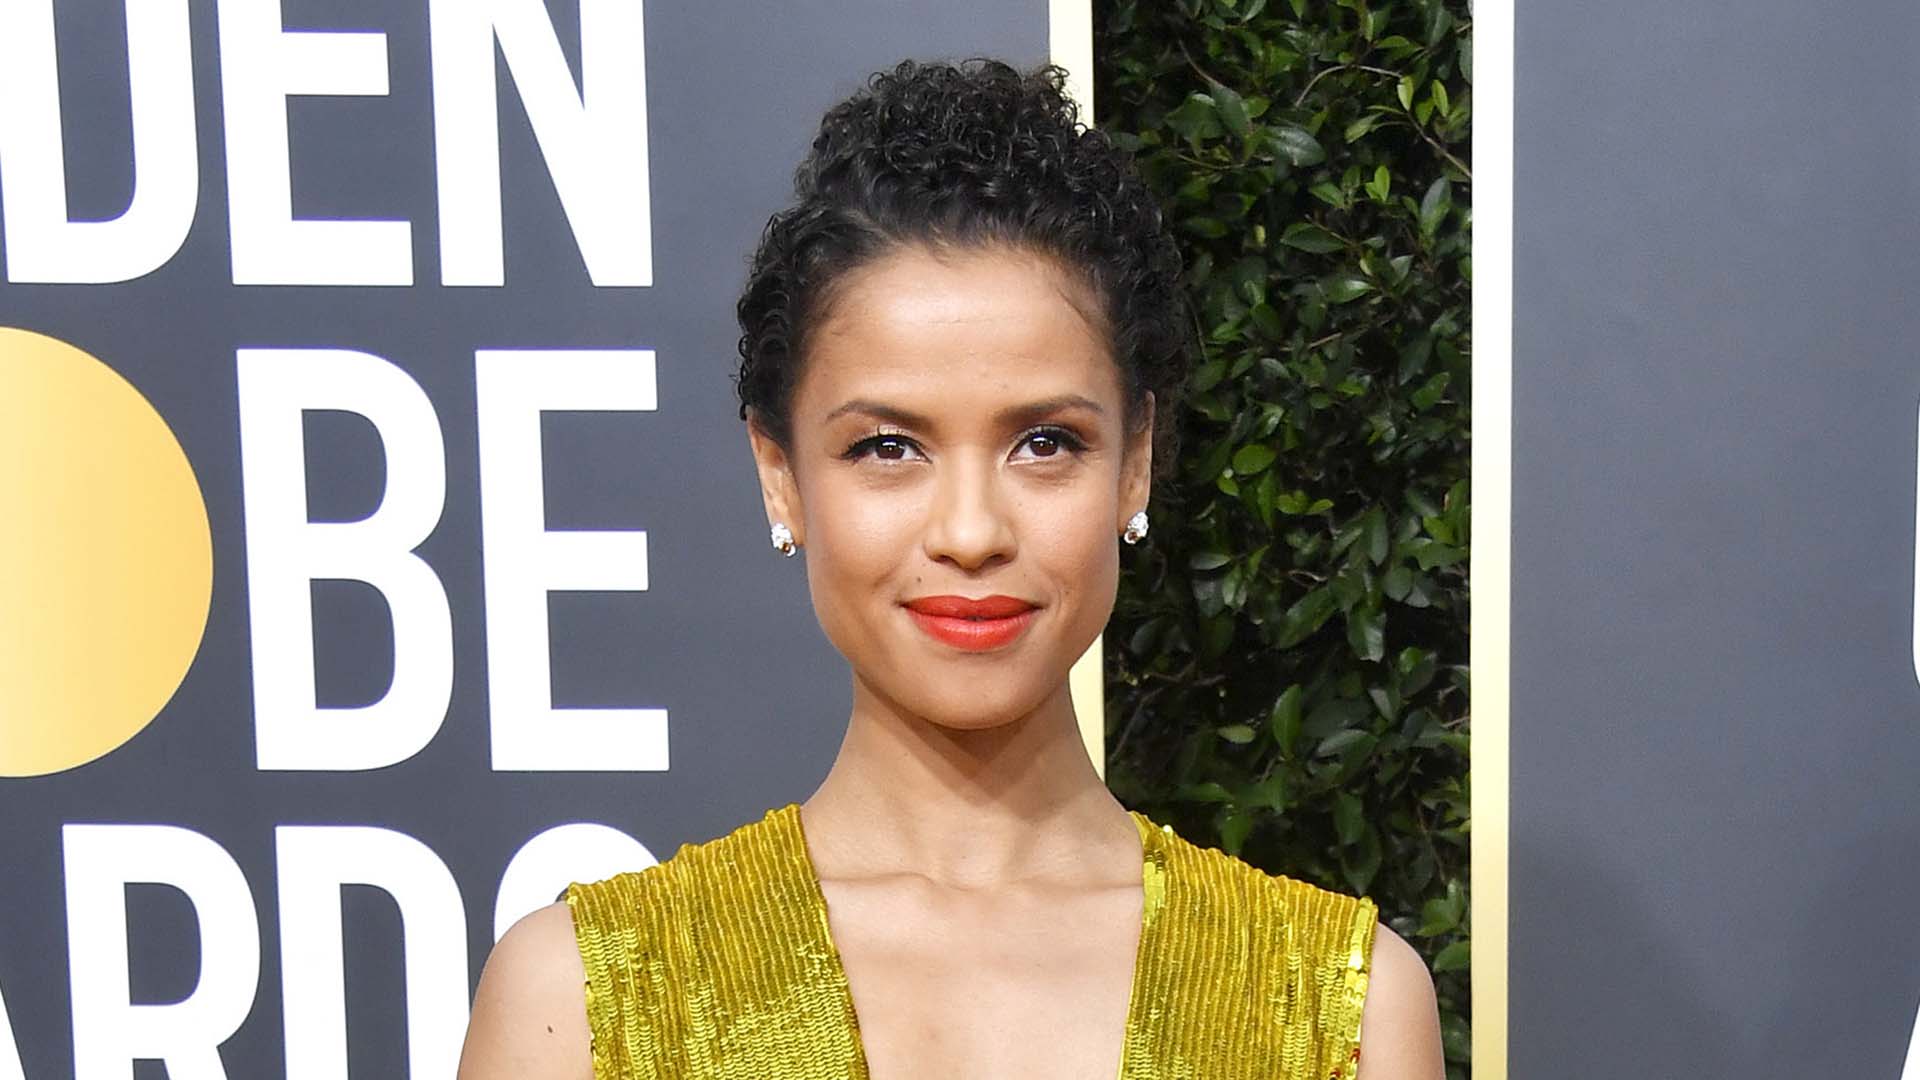 Gugu Mbatha-Raw Is Ready for ‘Surface’ Season Two: ‘I’m Thrilled to Continue This Journey’ 